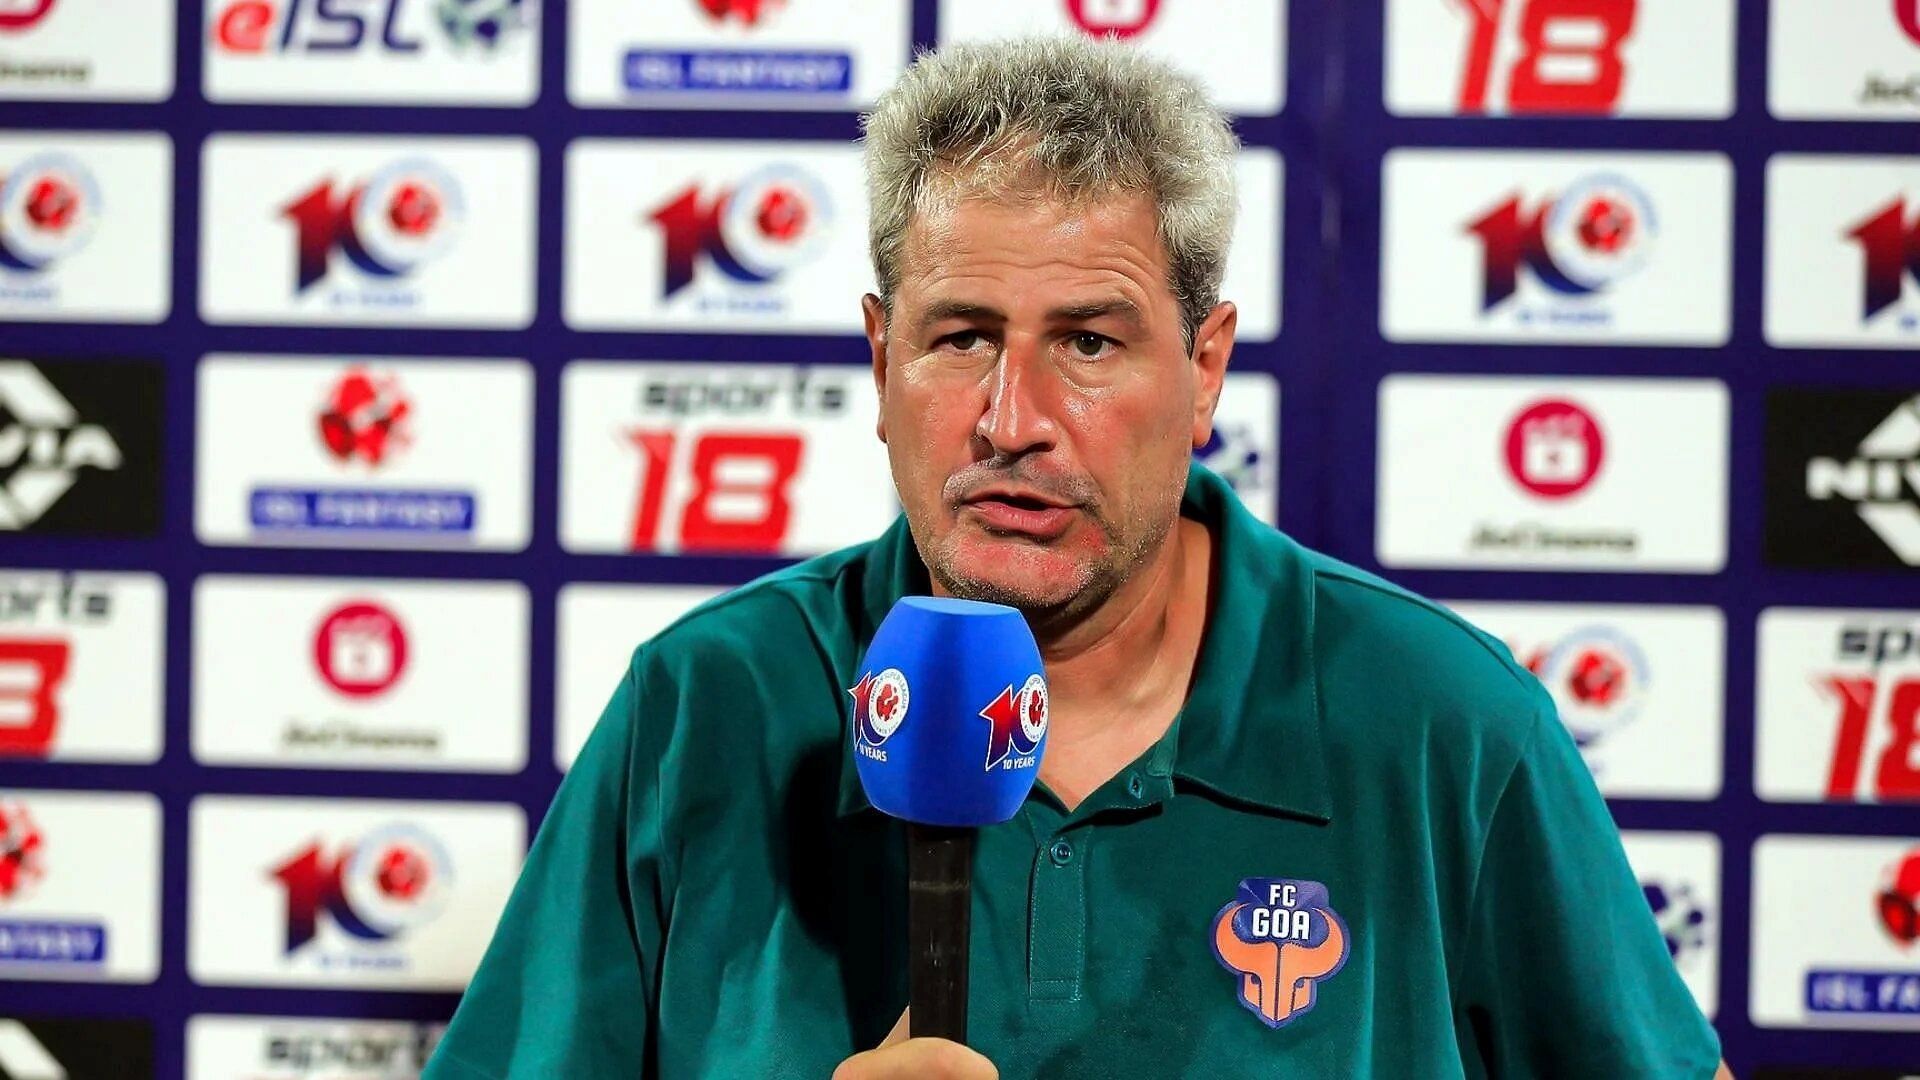 FC Goa head coach Manolo Marquez has stated that if he were a player, he wouldn